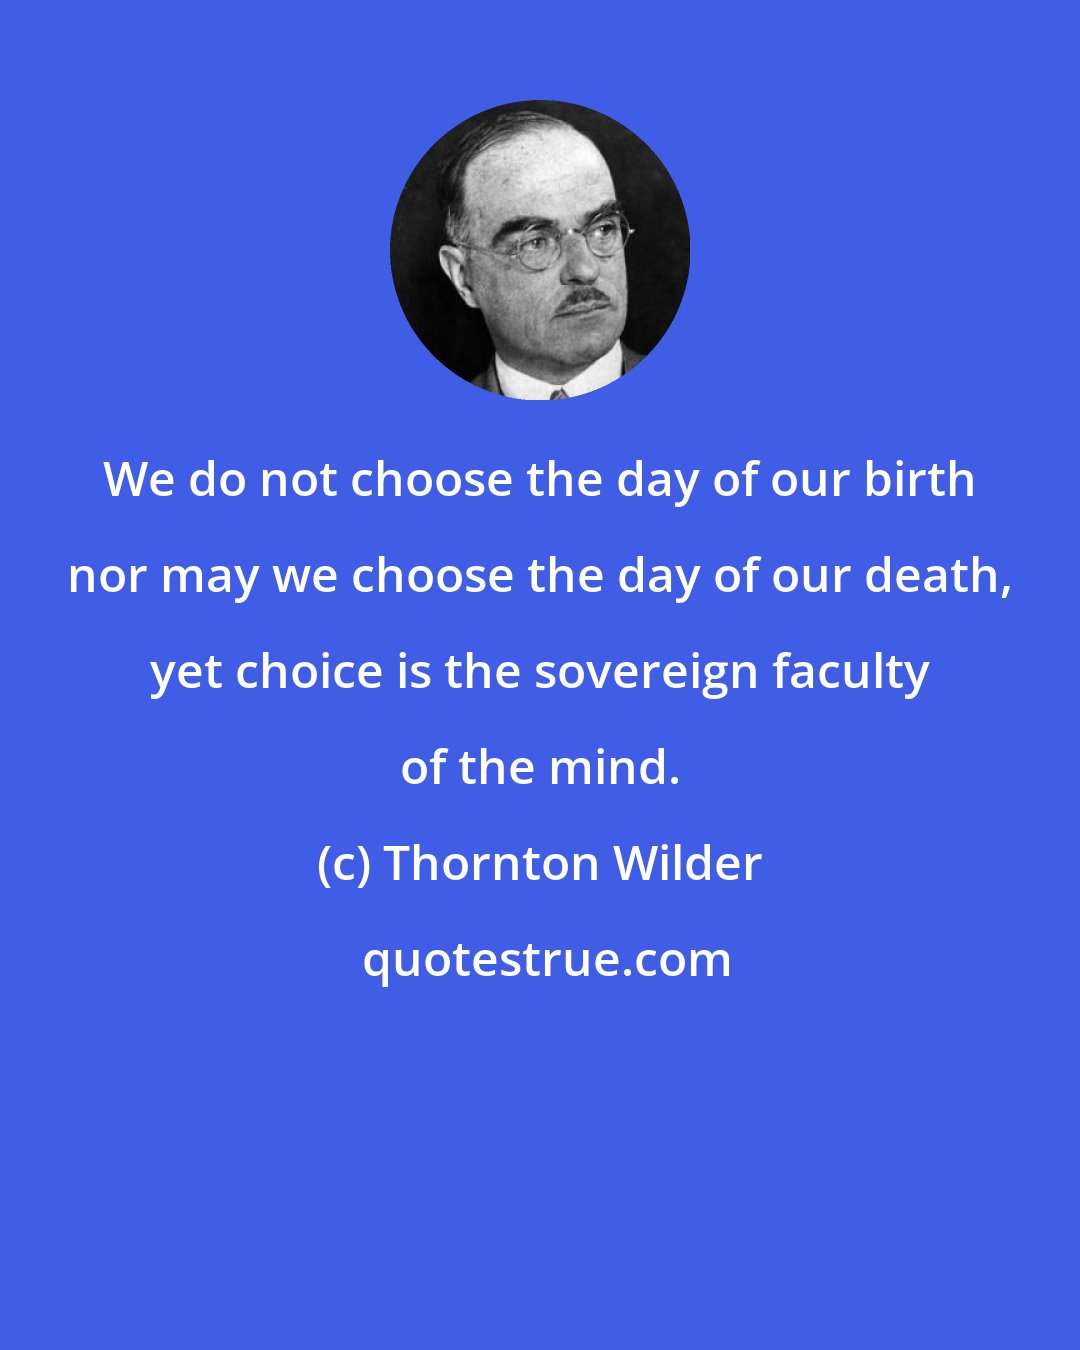 Thornton Wilder: We do not choose the day of our birth nor may we choose the day of our death, yet choice is the sovereign faculty of the mind.